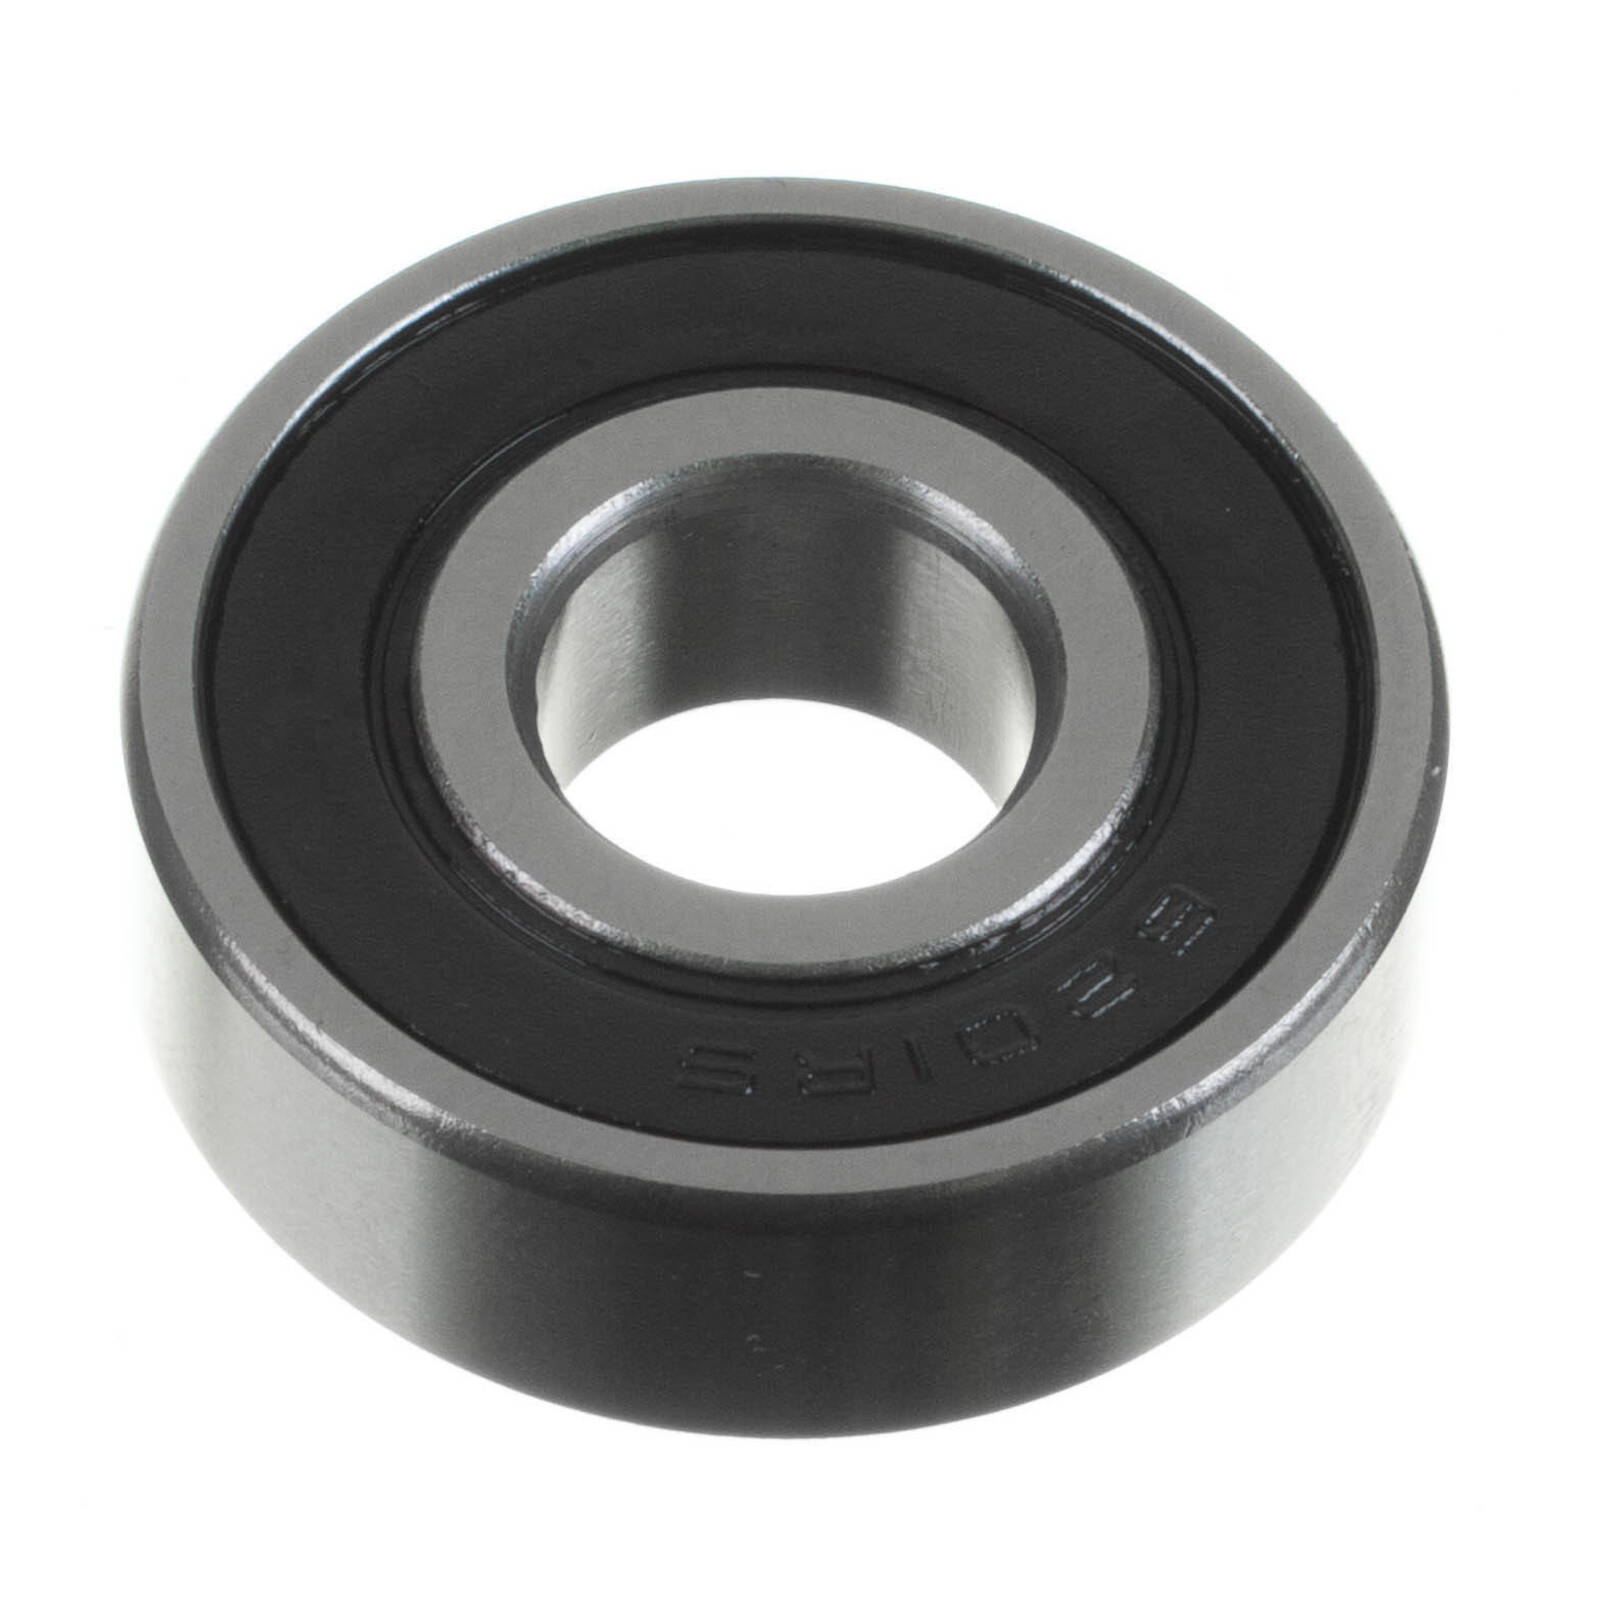 BEARING 6201 -2RS 1 PCE/EACH